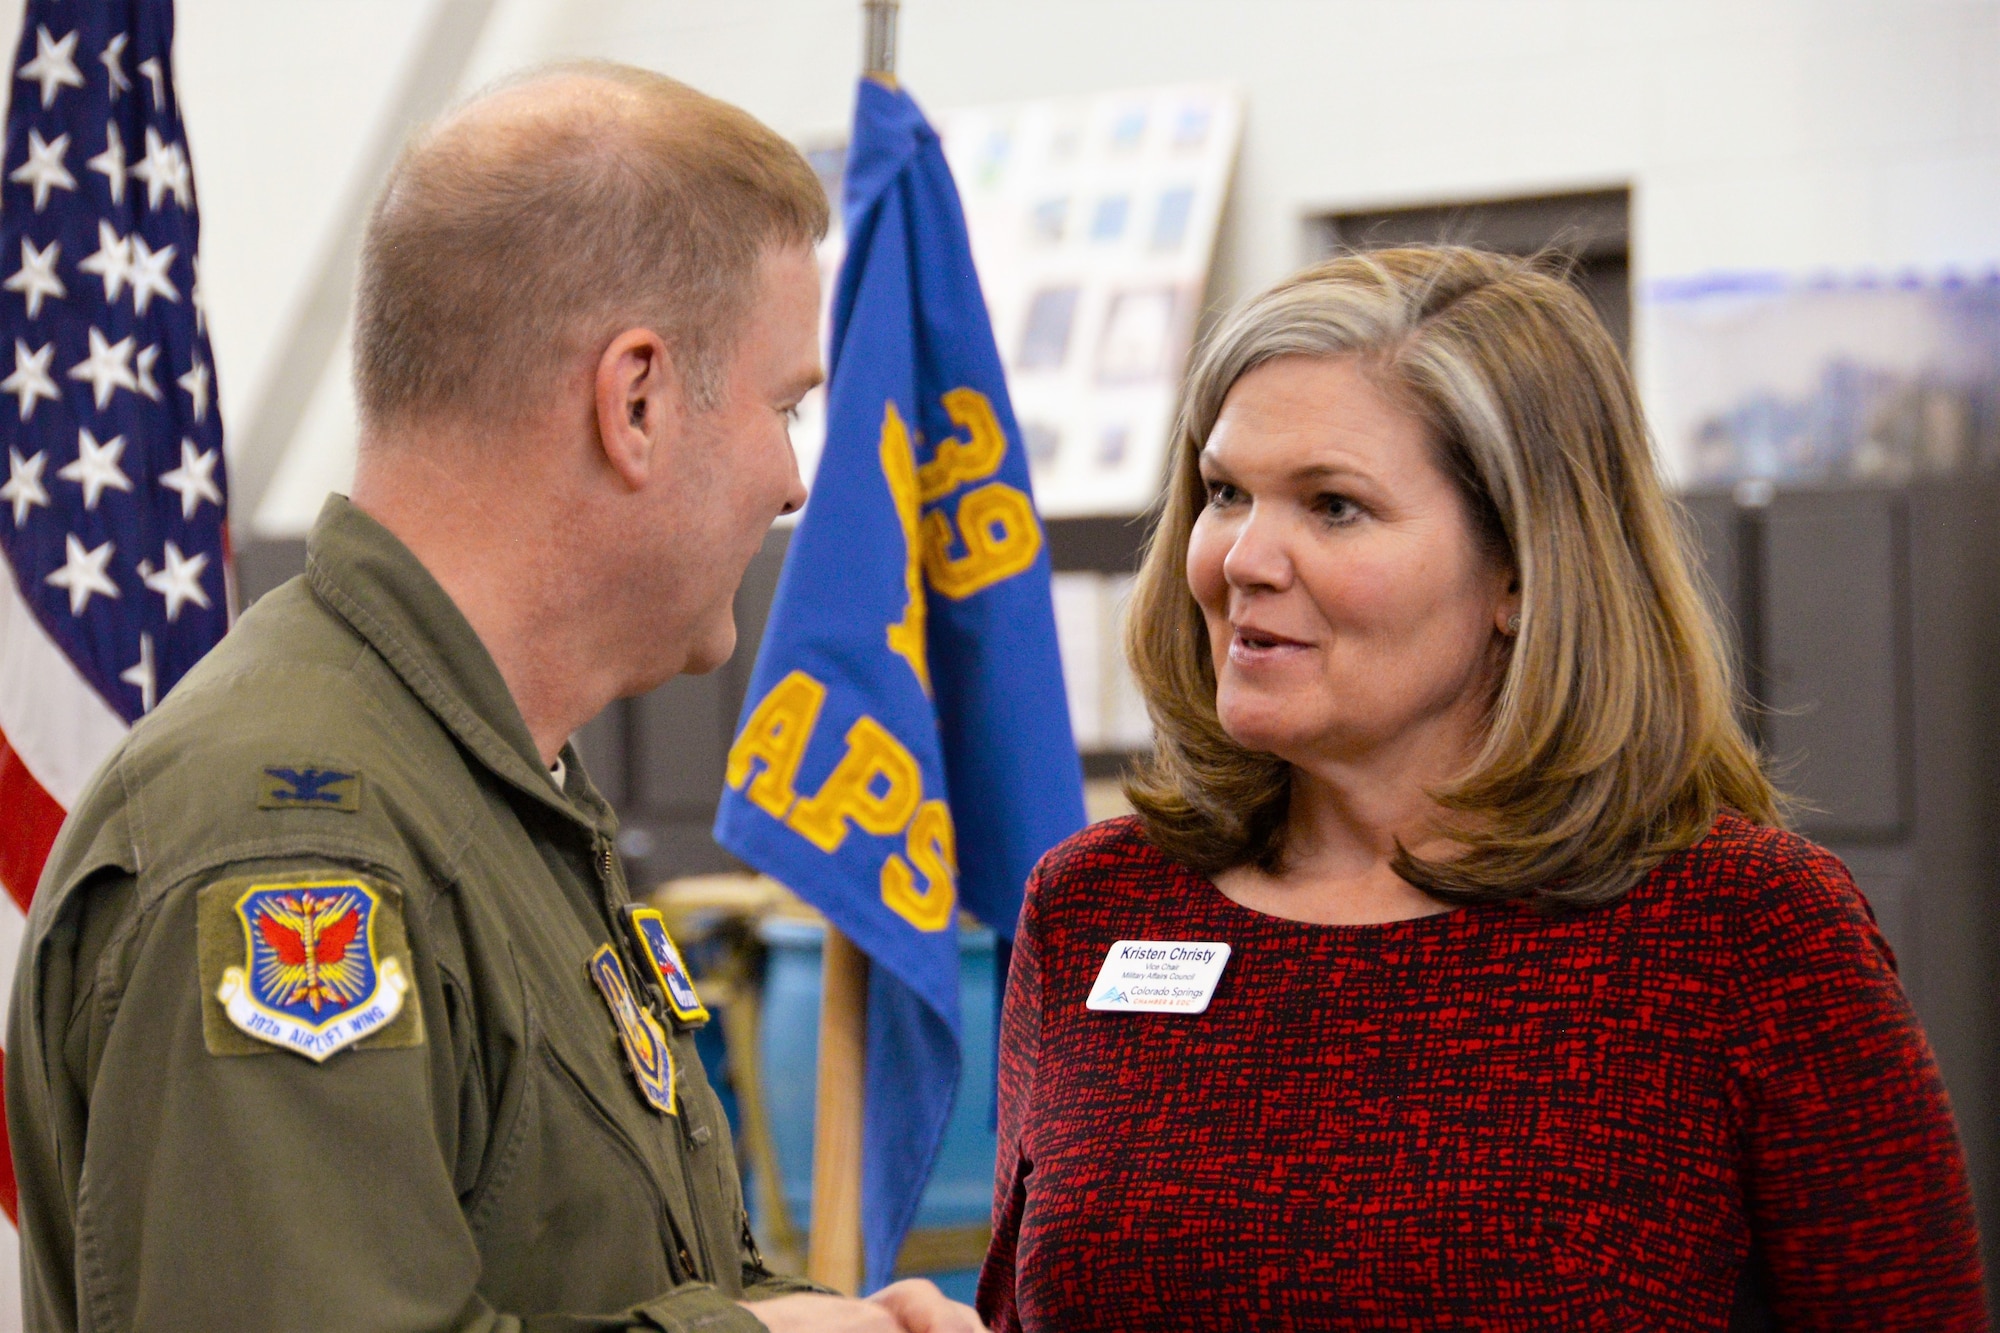 Col. James DeVere, the 302nd Airlift Wing commander, speaks with Kristen Christy, the Colorado Springs Chamber & EDC’s Military Affairs Council vice chair, during the Area Chiefs of Staff luncheon held at Peterson Air Force Base, Colorado March 21, 2018.